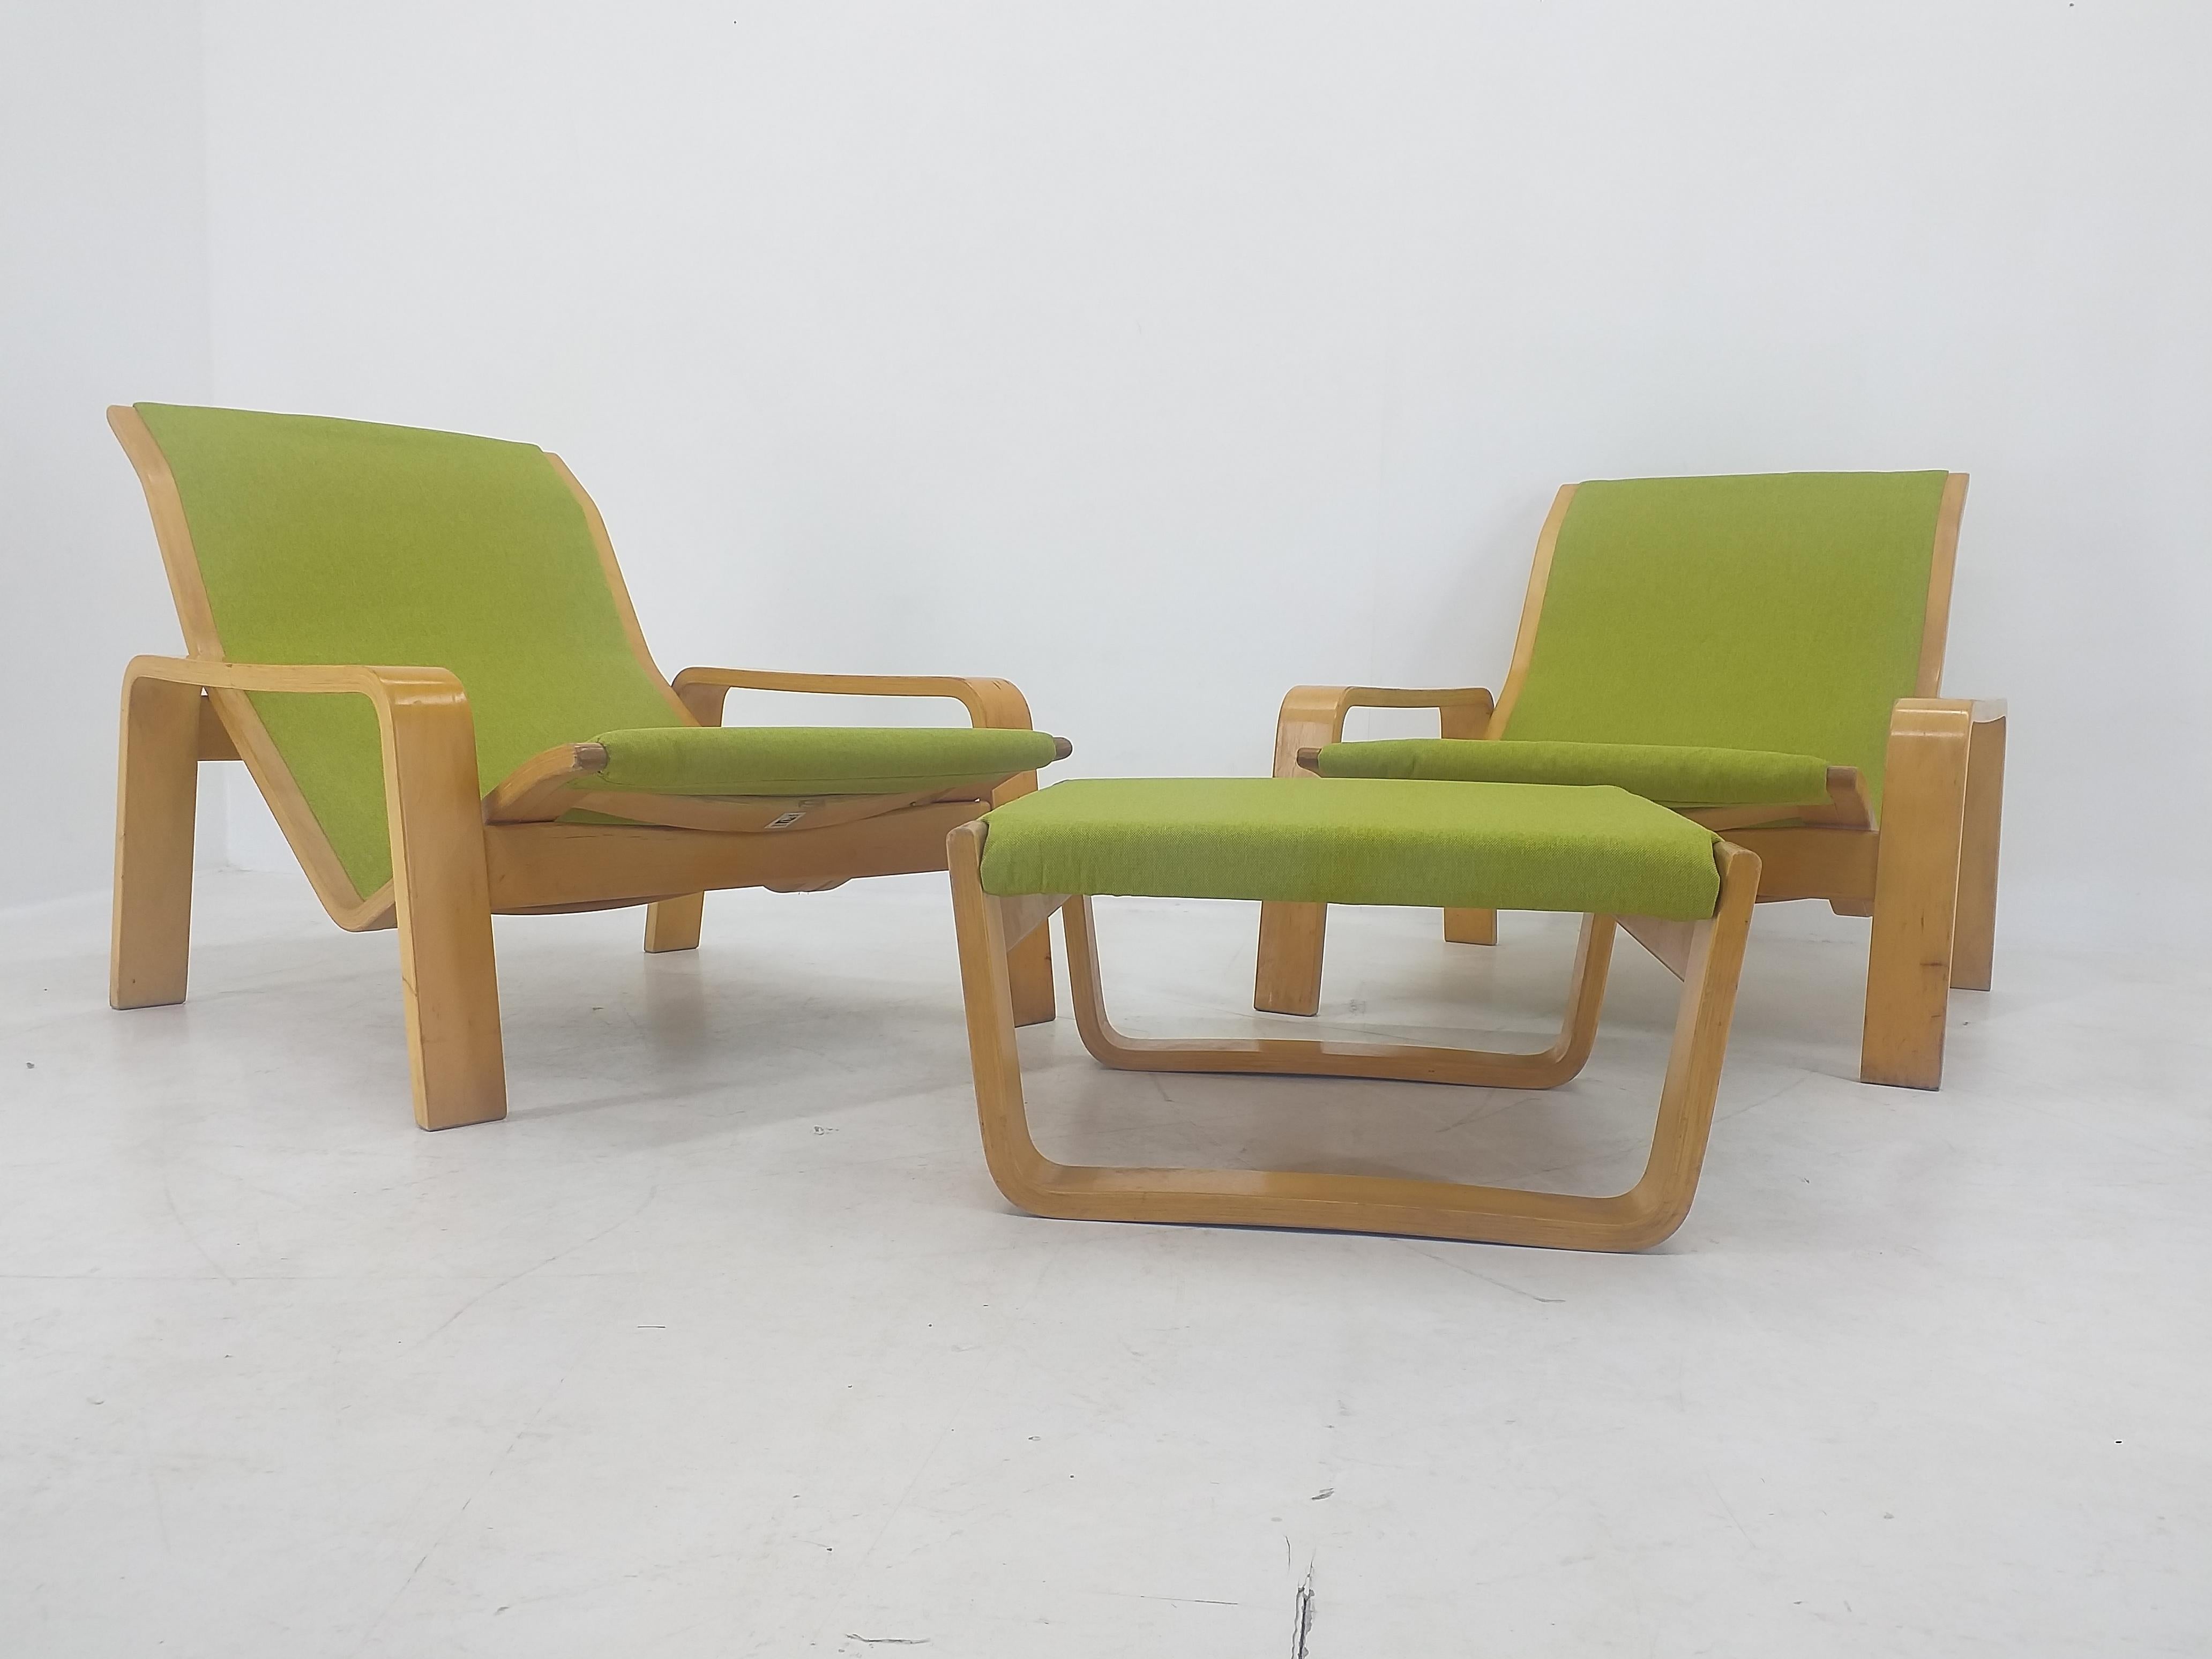 Pair of Lounge Chairs Pulkka, Ilmari Lappalainen for ASKO, Finland, 1970s For Sale 1